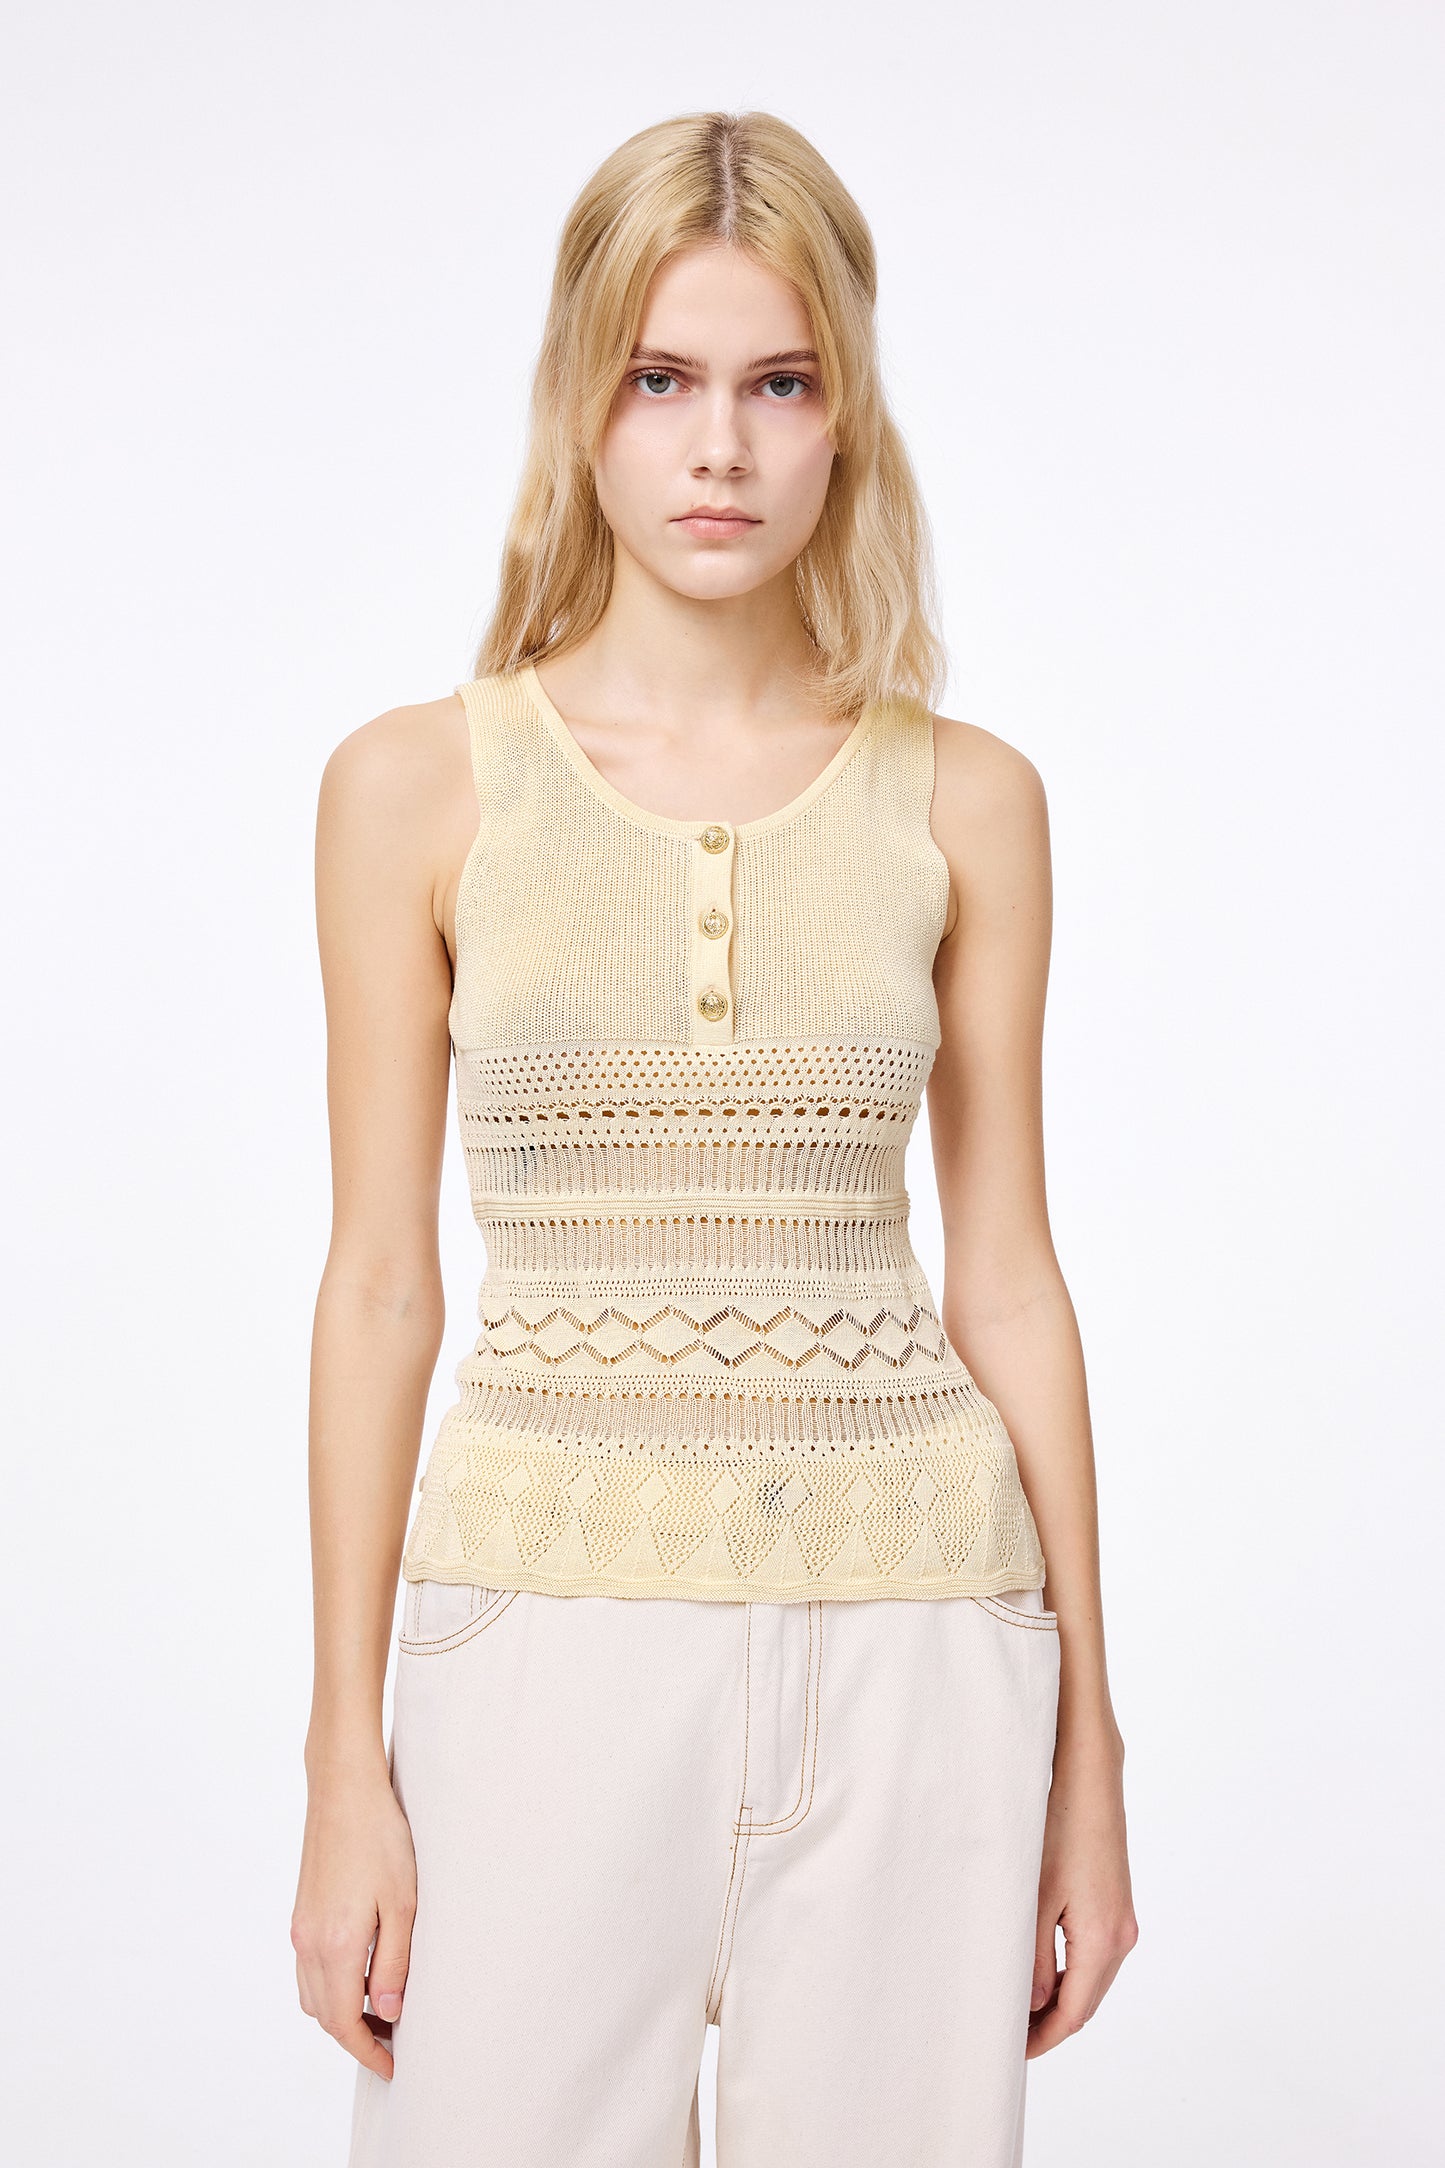 Alva Handcrafted Lace Crochet Top in Cotton Viscose Knit